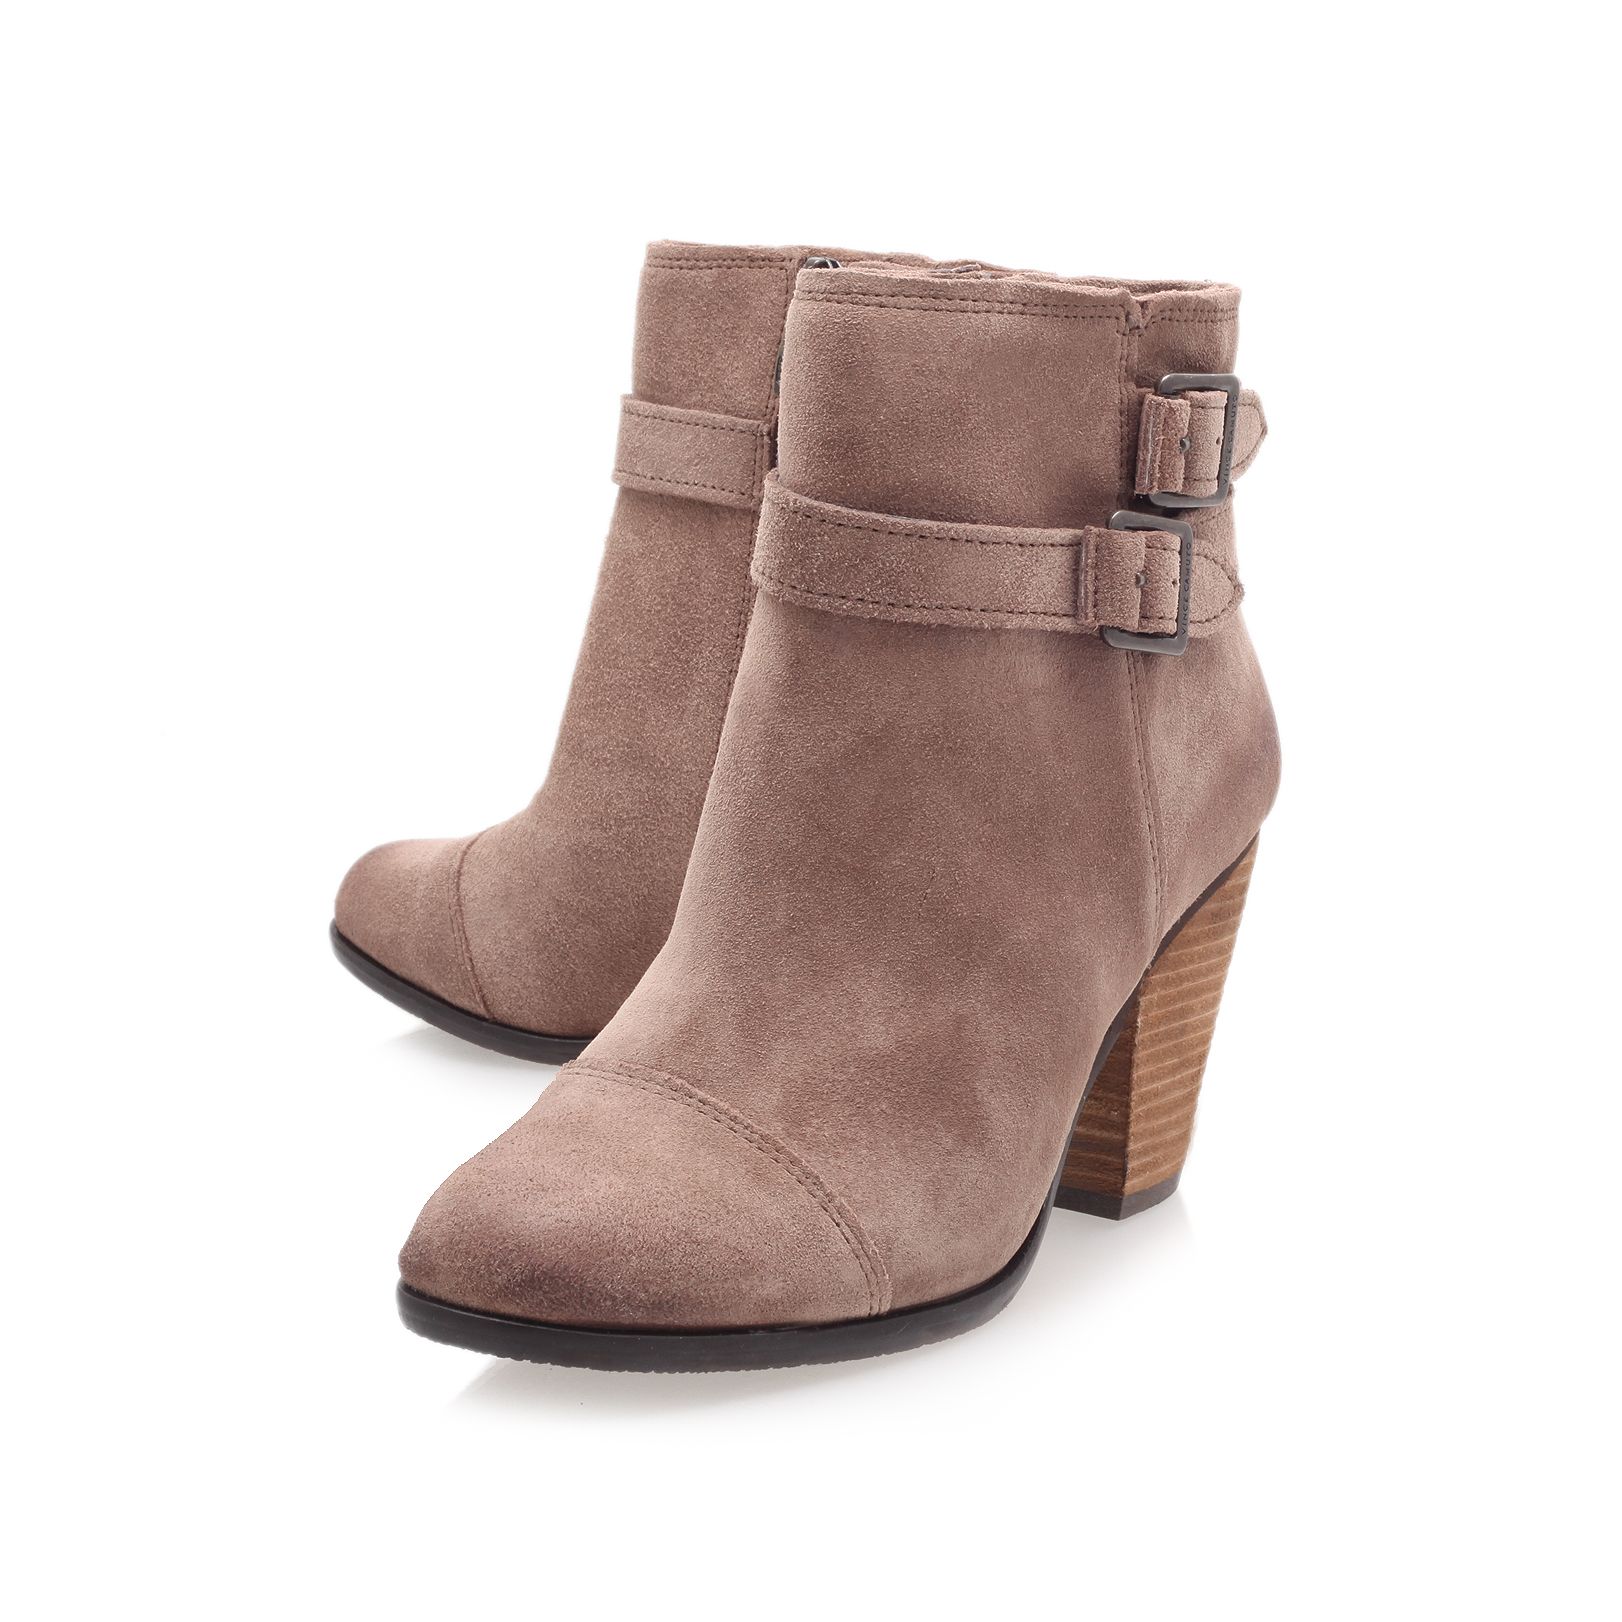 Vince camuto Hasia High Heel Ankle Boots in Natural | Lyst